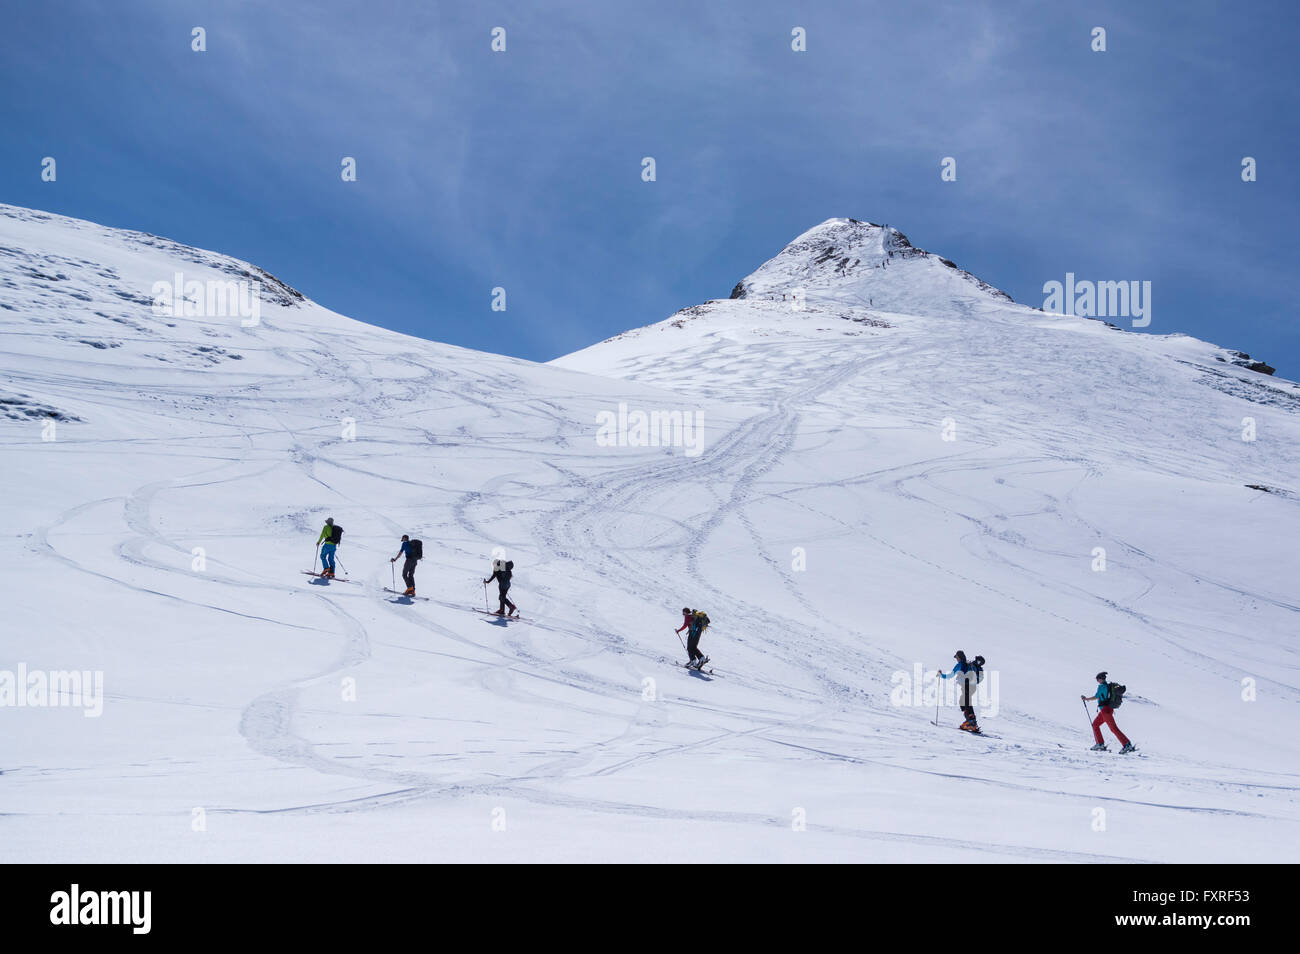 Ski mountaineers in the Swiss Alps, ascending to the summit of Rossstock mountain on a sunny day. Spilau, Uri, Switzerland. Stock Photo